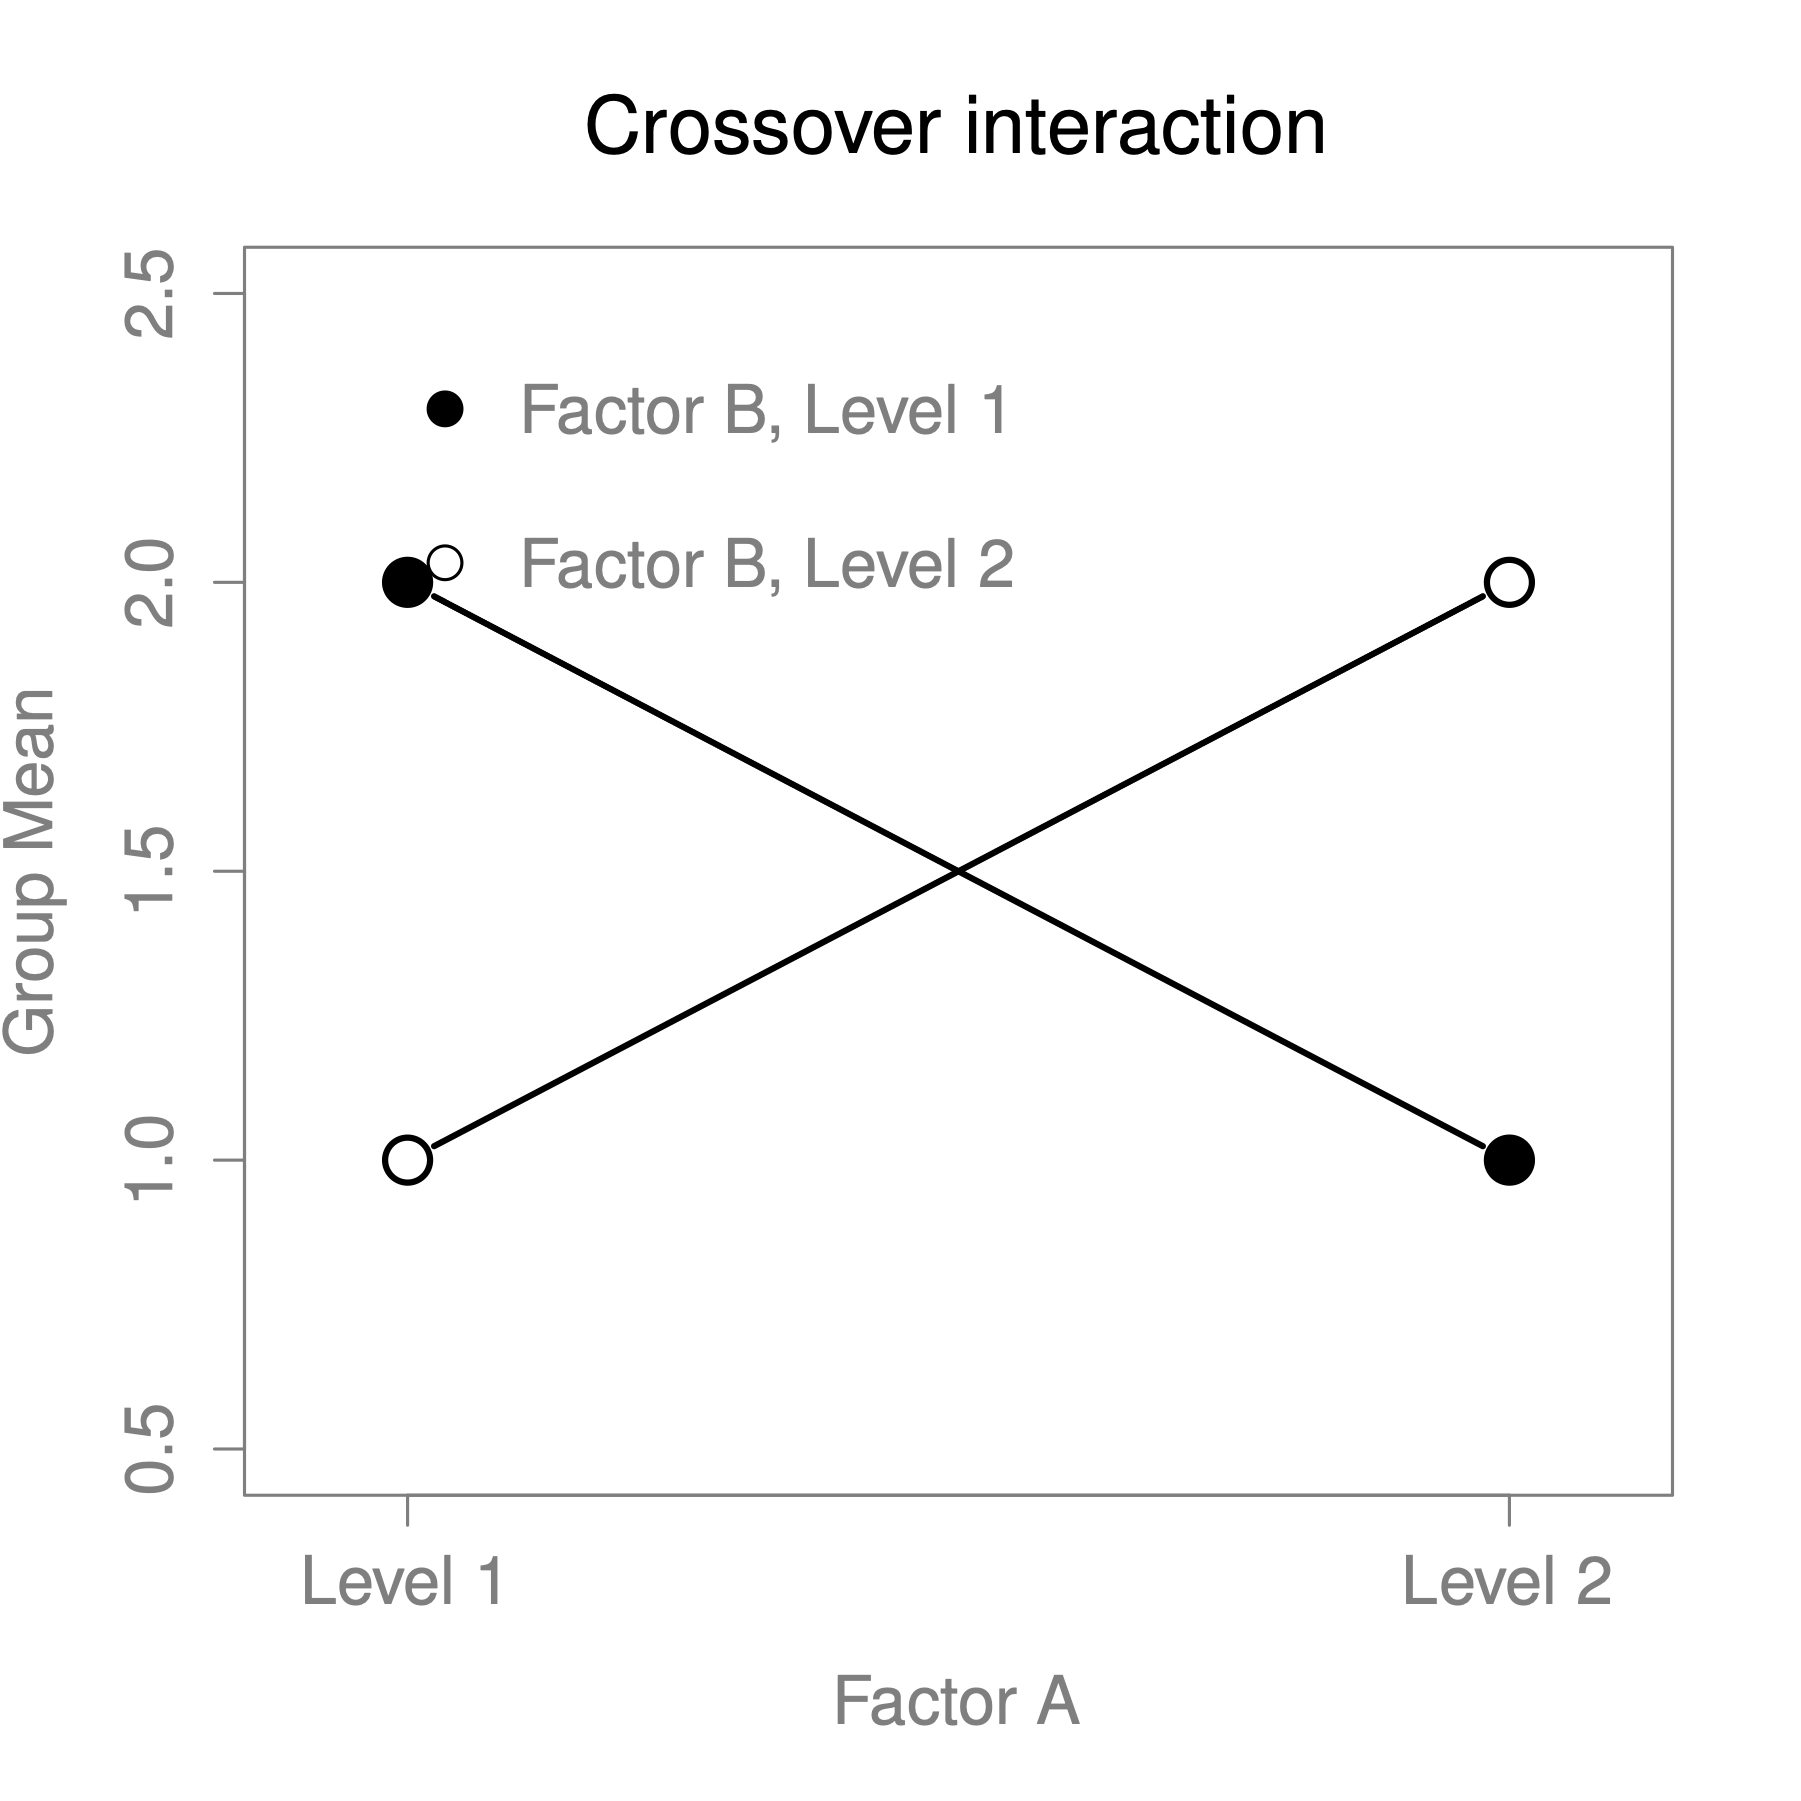 Qualitatively different interactions for a $2 \times 2$ ANOVA